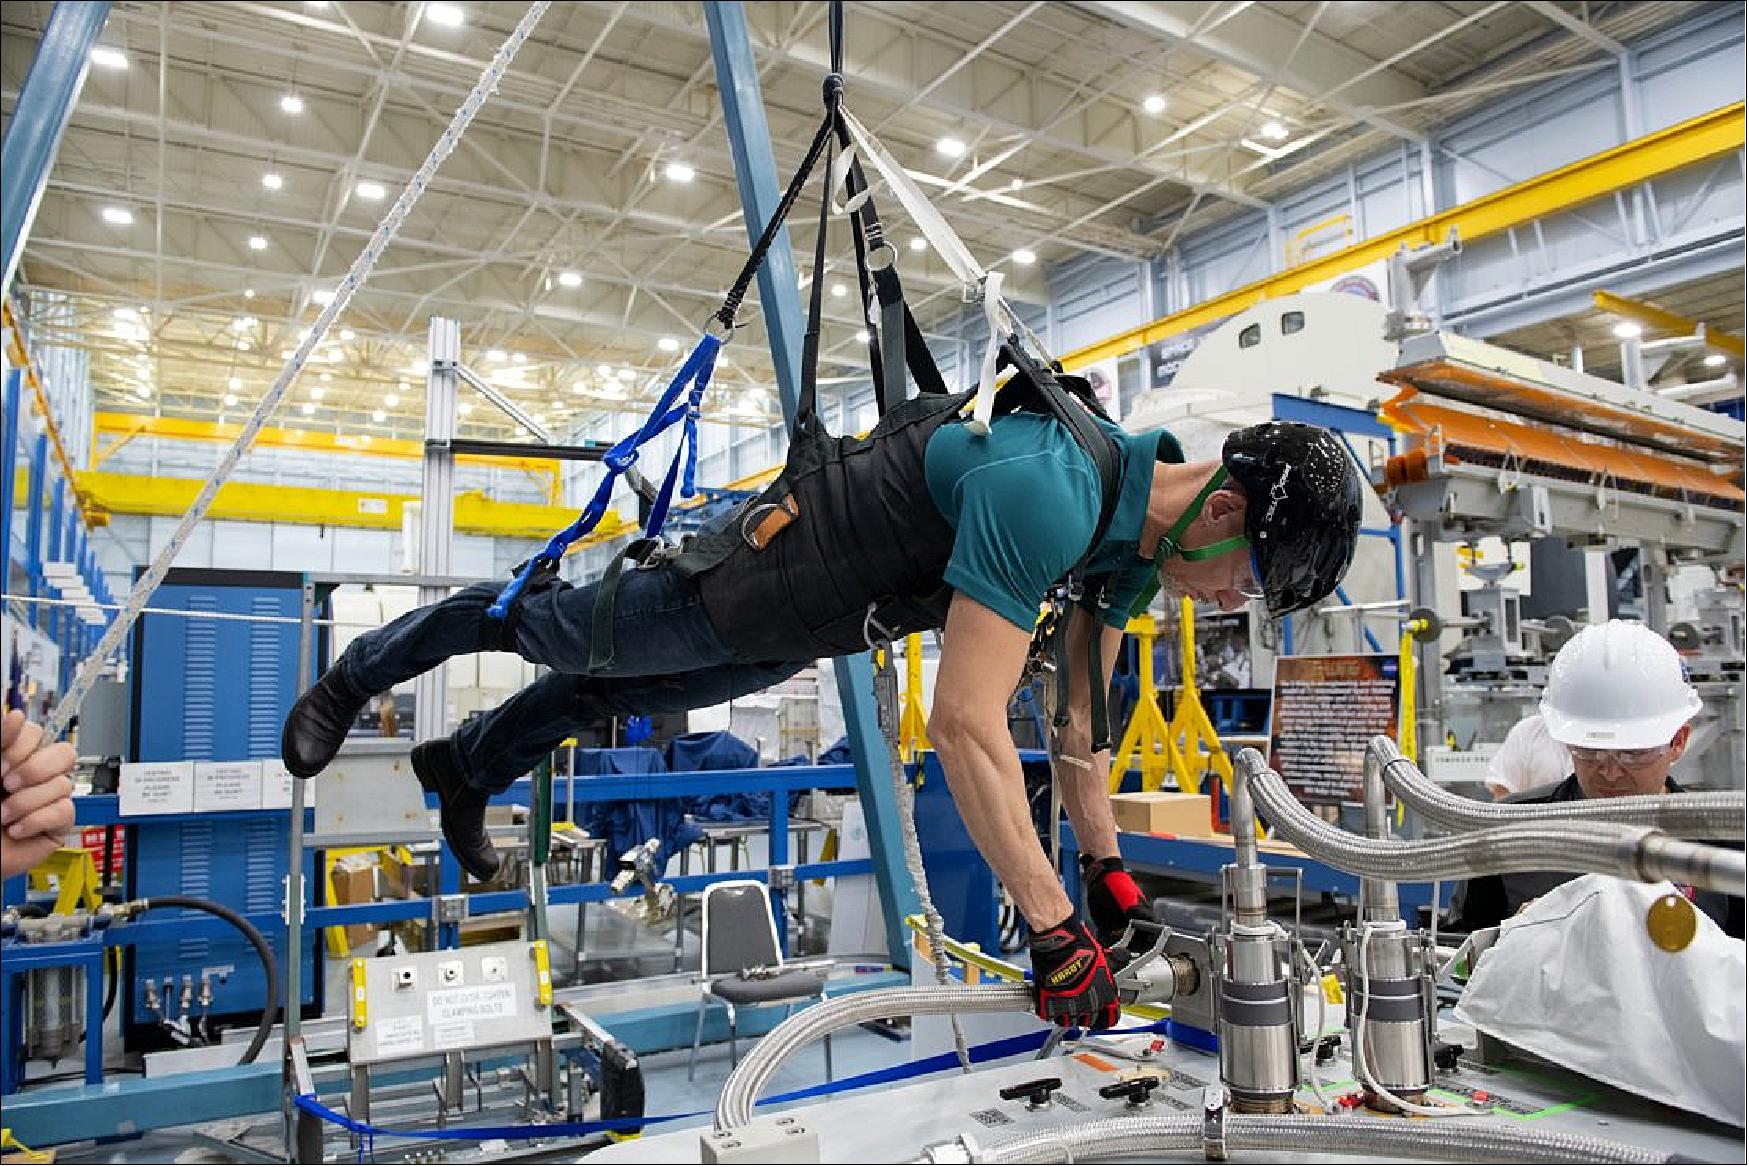 Figure 11: In preparation for his 'Beyond' mission, ESA astronaut Luca Parmitano was at the Johnson Space Center in Houston, USA, in March 2019. Here he is strapped to the Partial Gravity Simulator to practice repairing the dark-matter hunter AMS-02 (image credit: ESA, S. Corvaja)